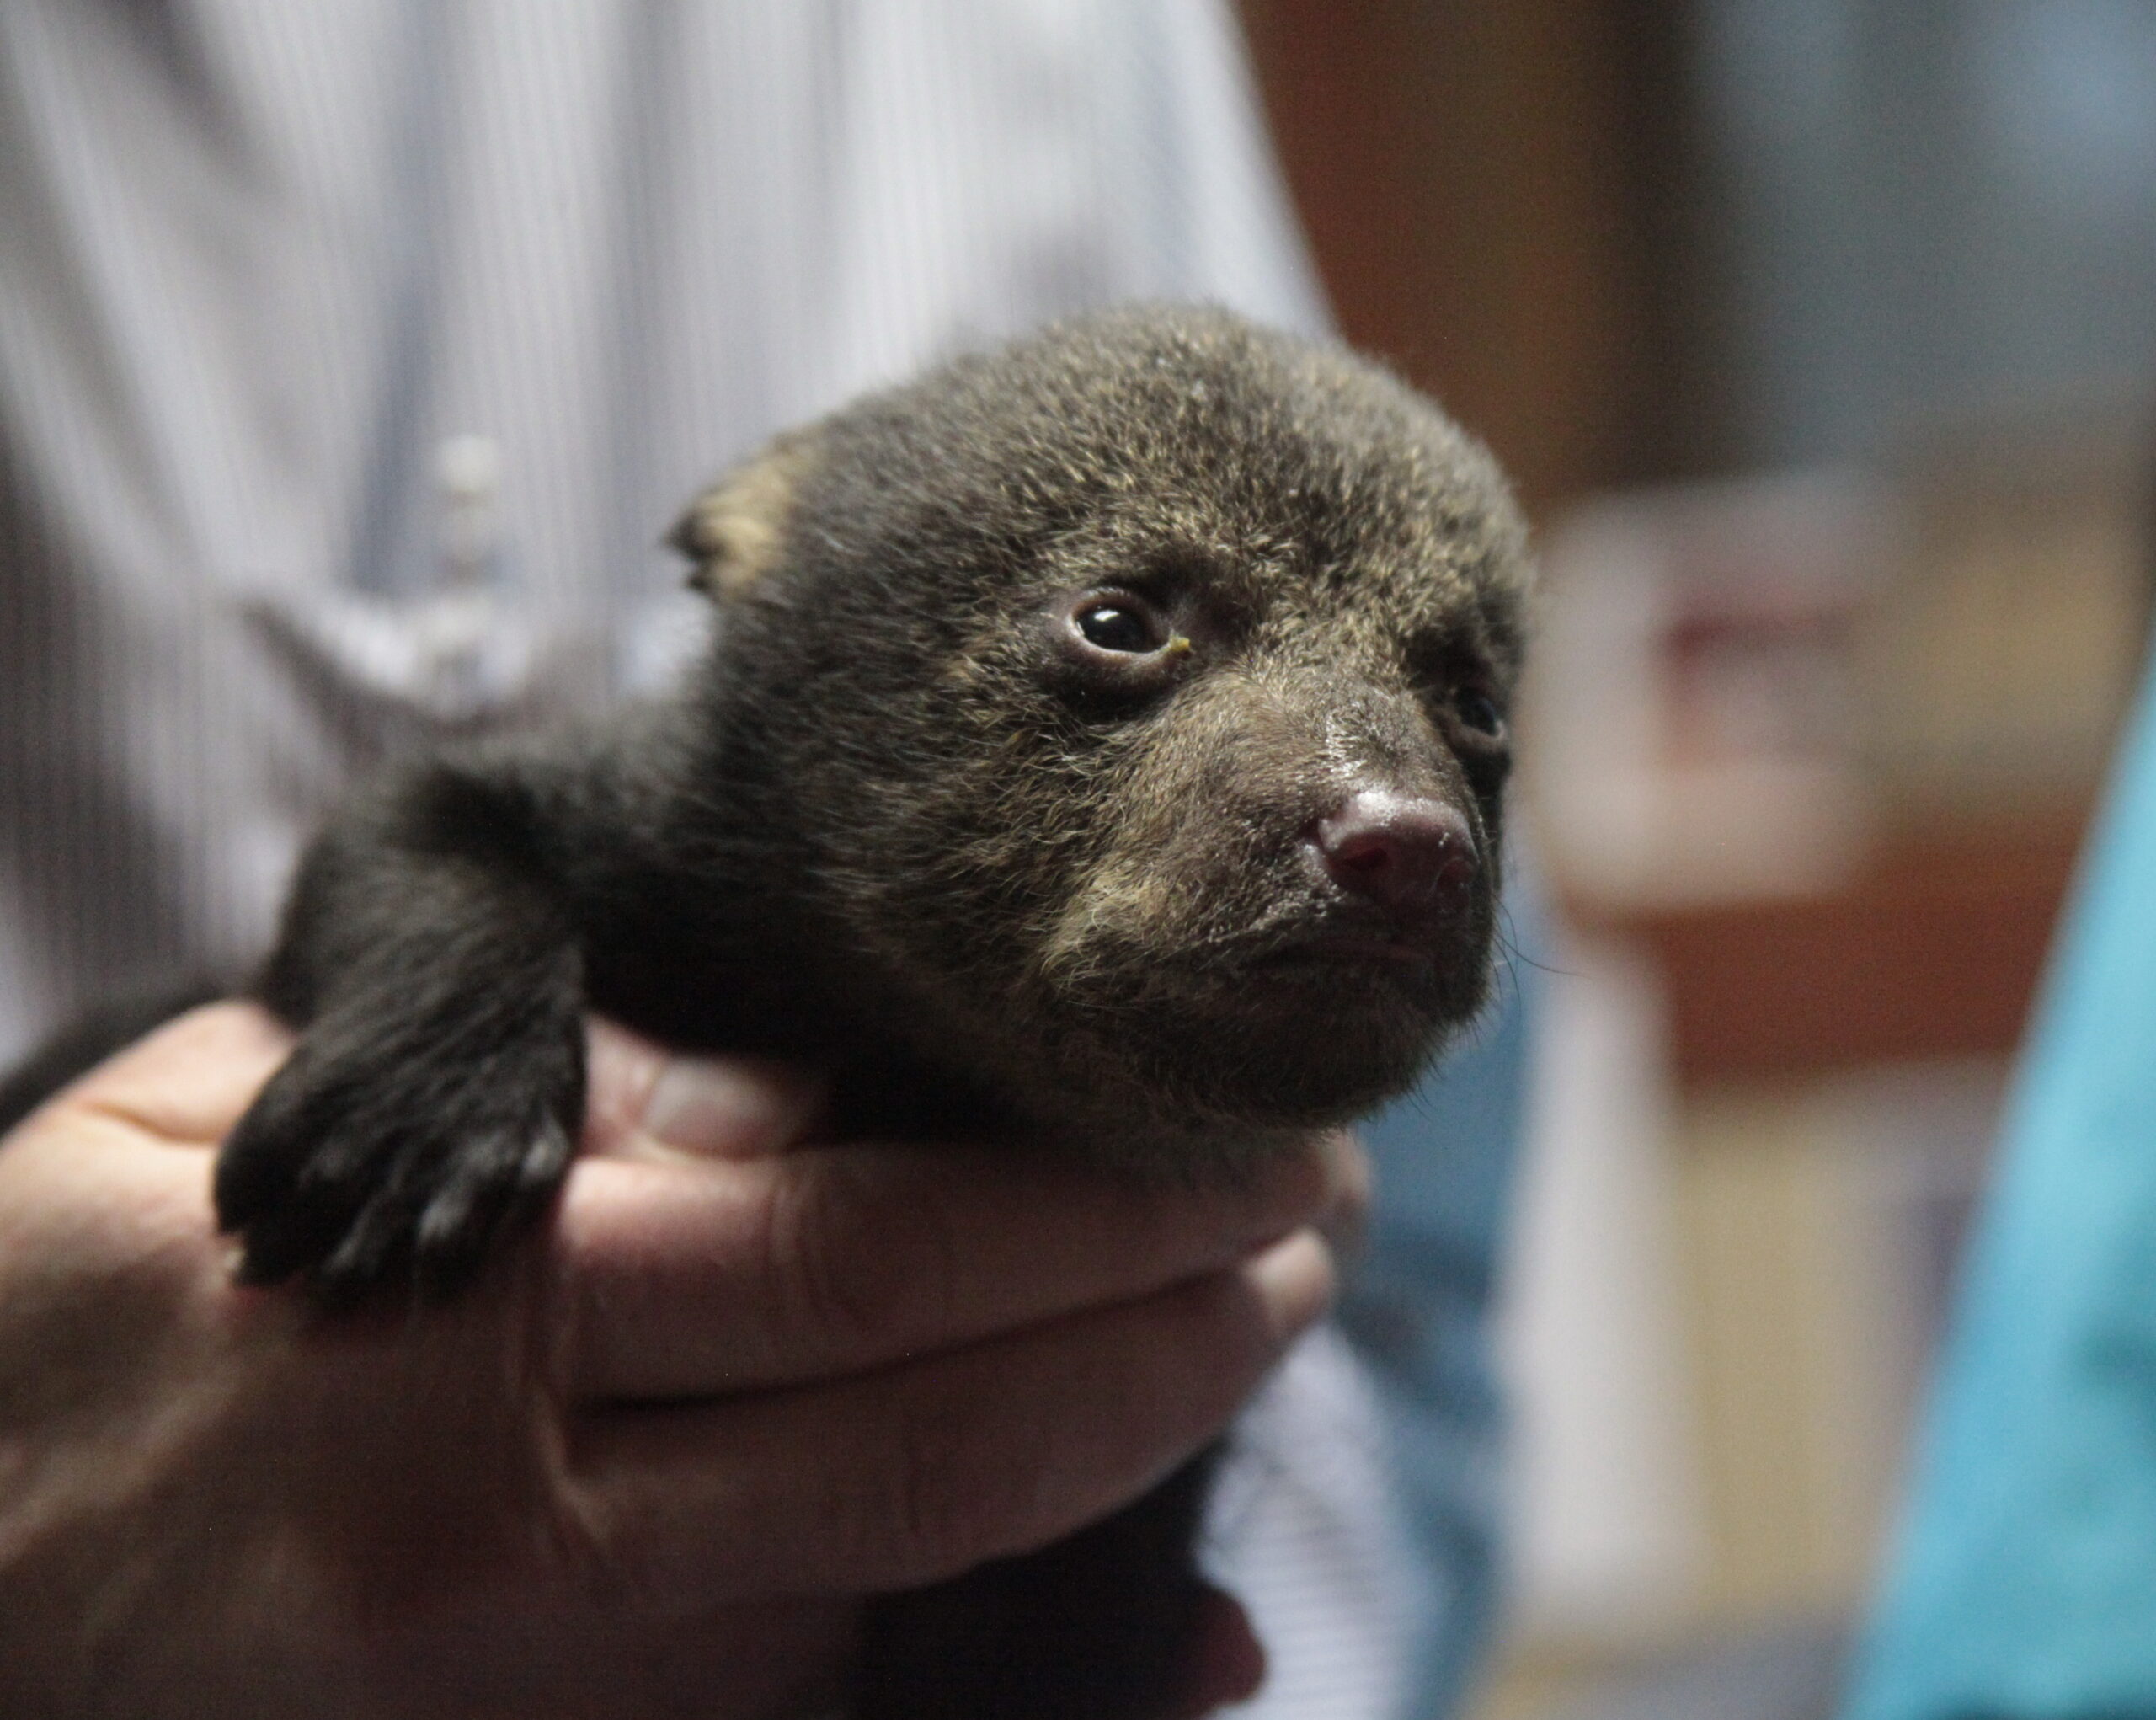 An orphaned bear cub held by Principle Deputy Undersecretary of the Interior Michael Bean. The bear was rescued after the death of its mother and is expected to be repatriated to a nursing foster bear in the wild. Photo by Tom MacKenzie